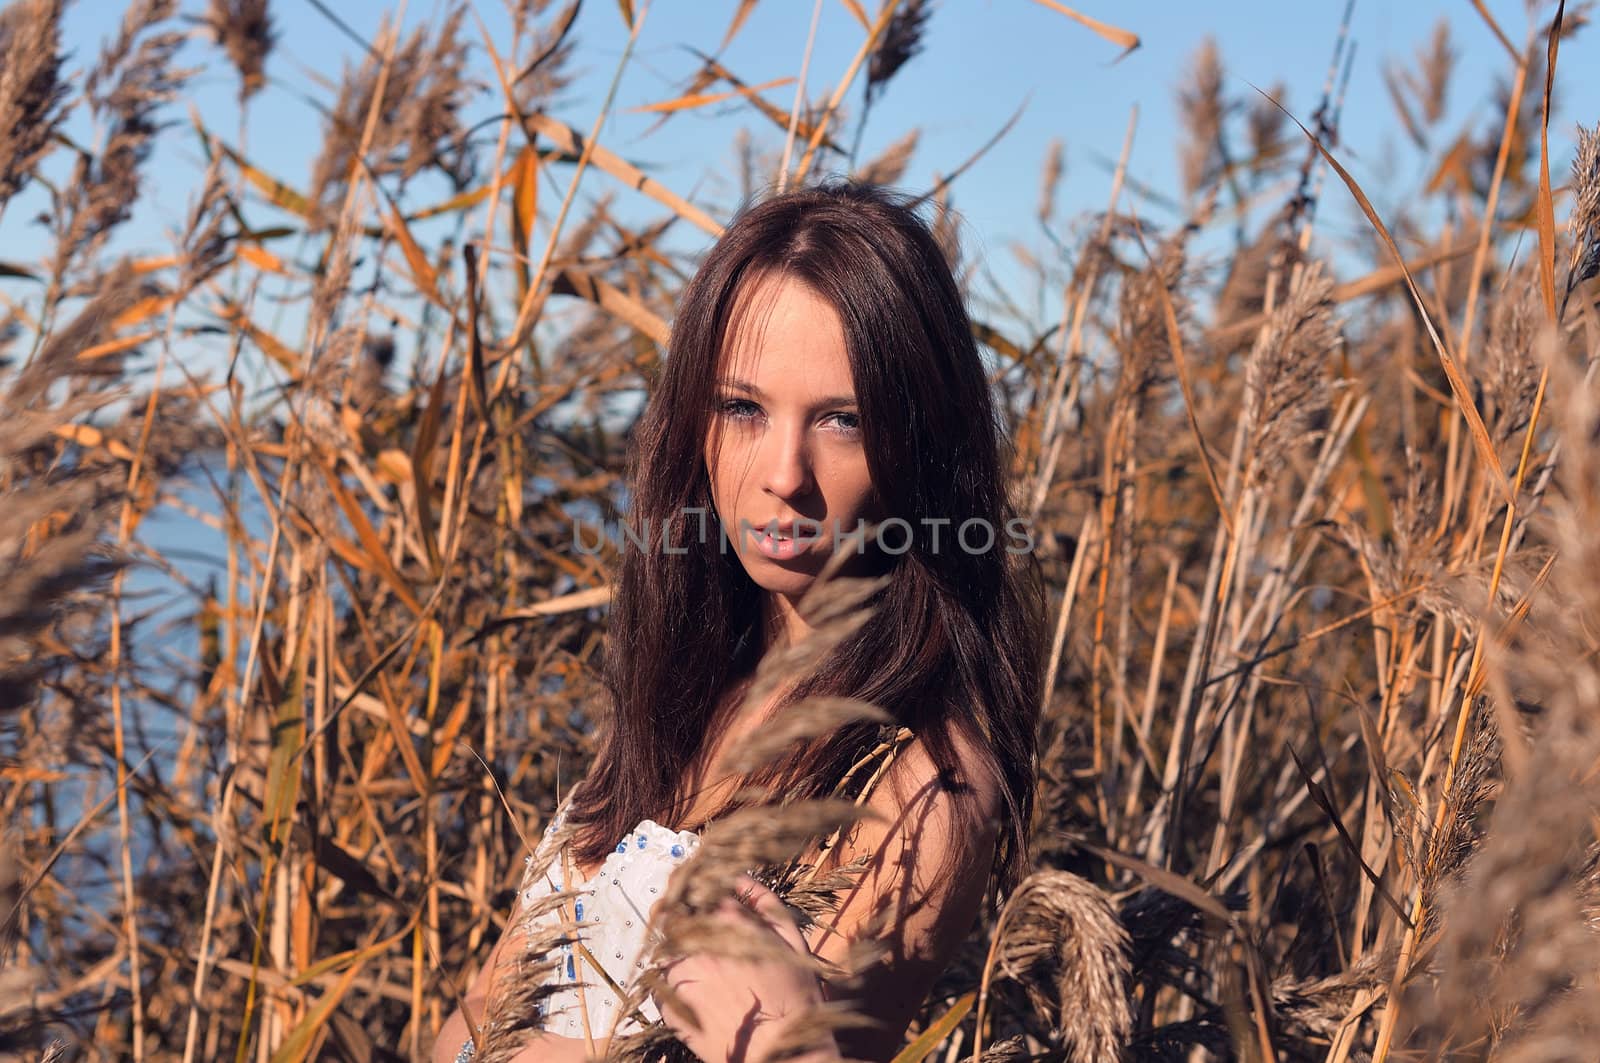 Gentle Beauty Amongst The Reeds by peterveiler